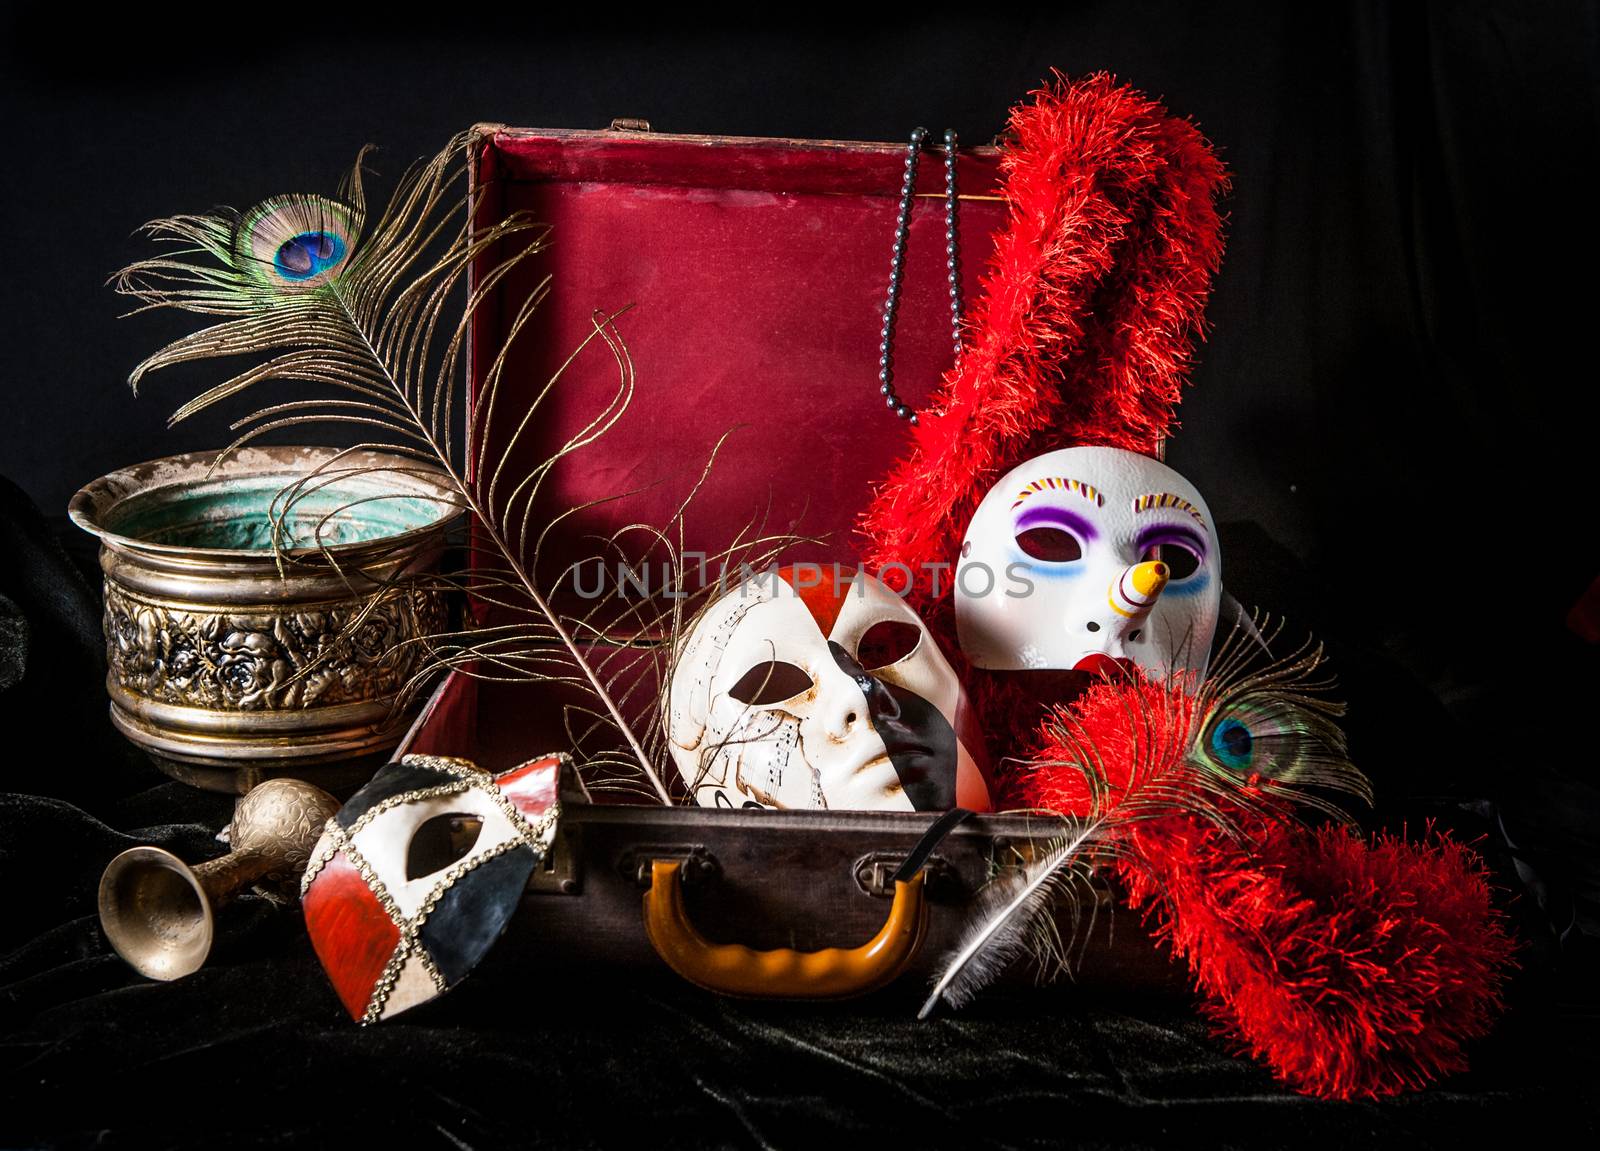 Bright porcelain mask red suitcase peacock feather by snelsonc